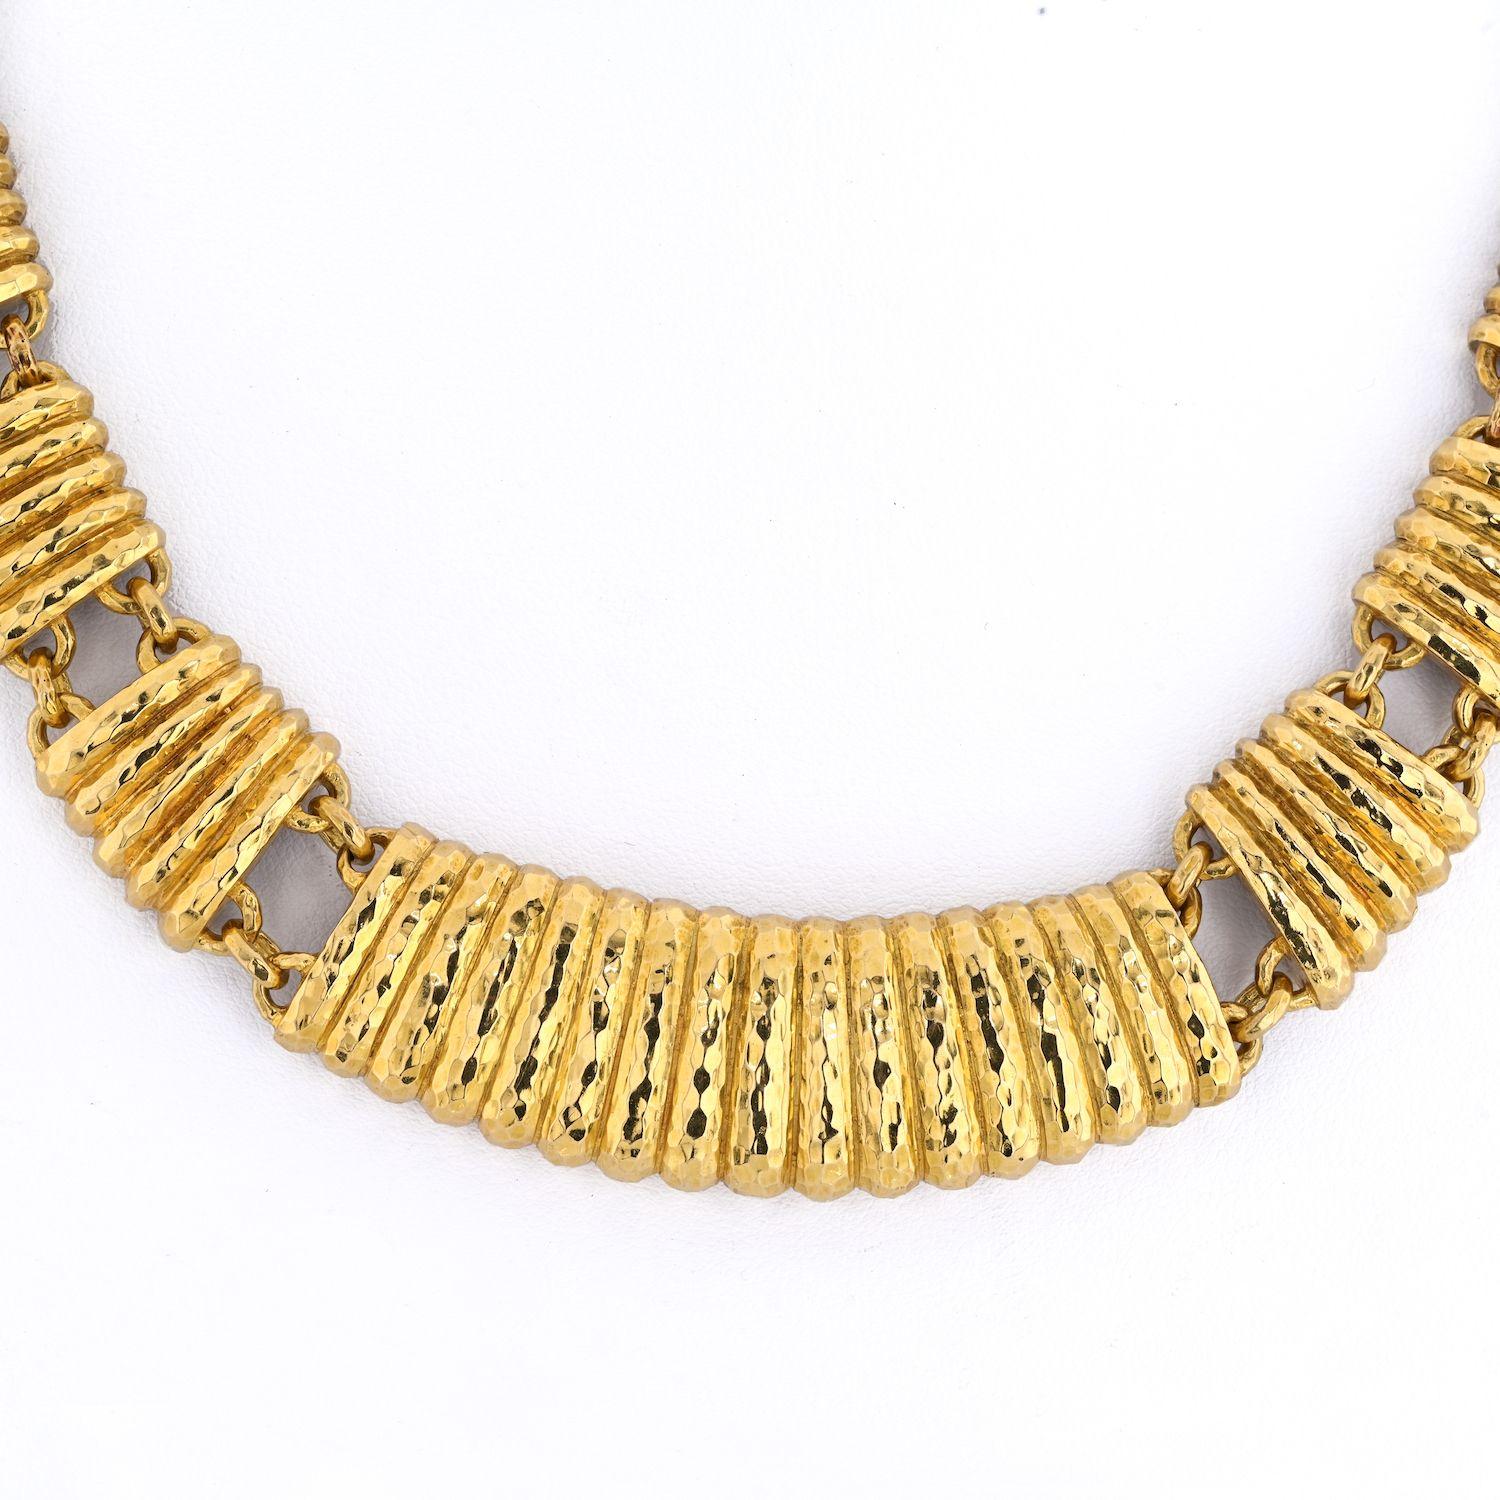 David Webb 18K yellow gold fluted panel link necklace. Crafted in 1970's this is a true vintage gem. Perfect for every day wear or on your special night out. The hammered finish gives this necklace a perfect shimmer, with a soft glow to the entire